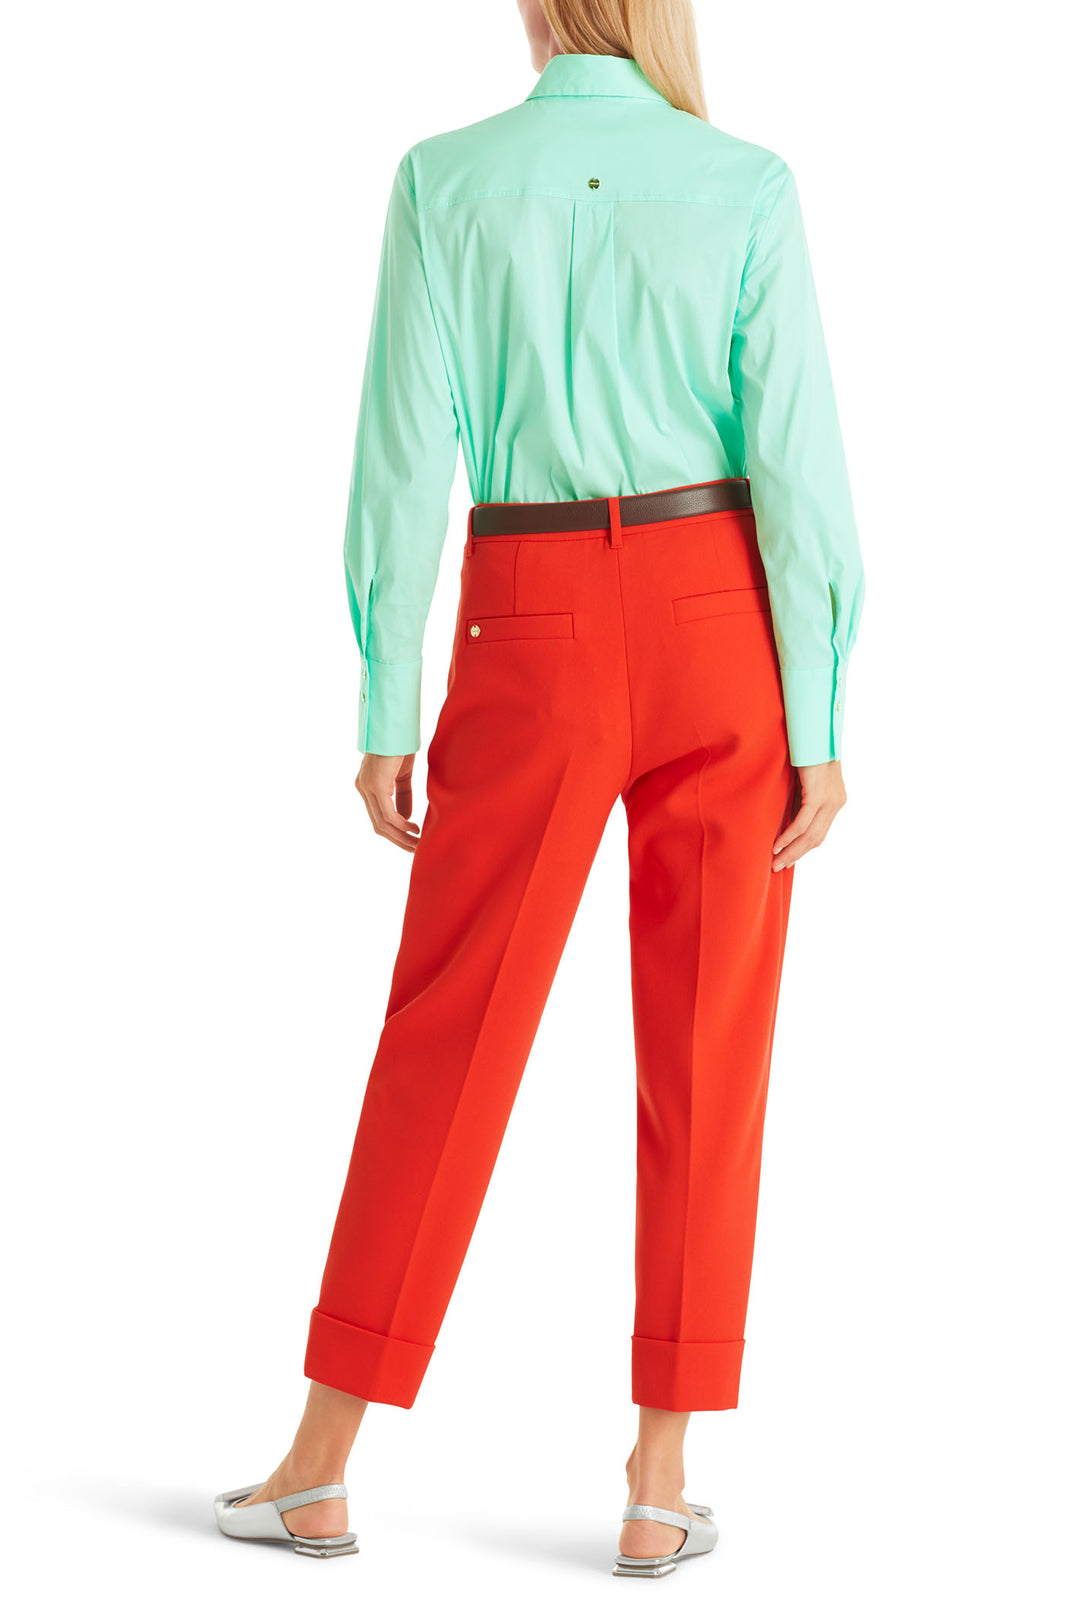 Marc Cain Collection WC 81.13 W22 223 Bright Tomato Red Trousers - Olivia Grace Fashion